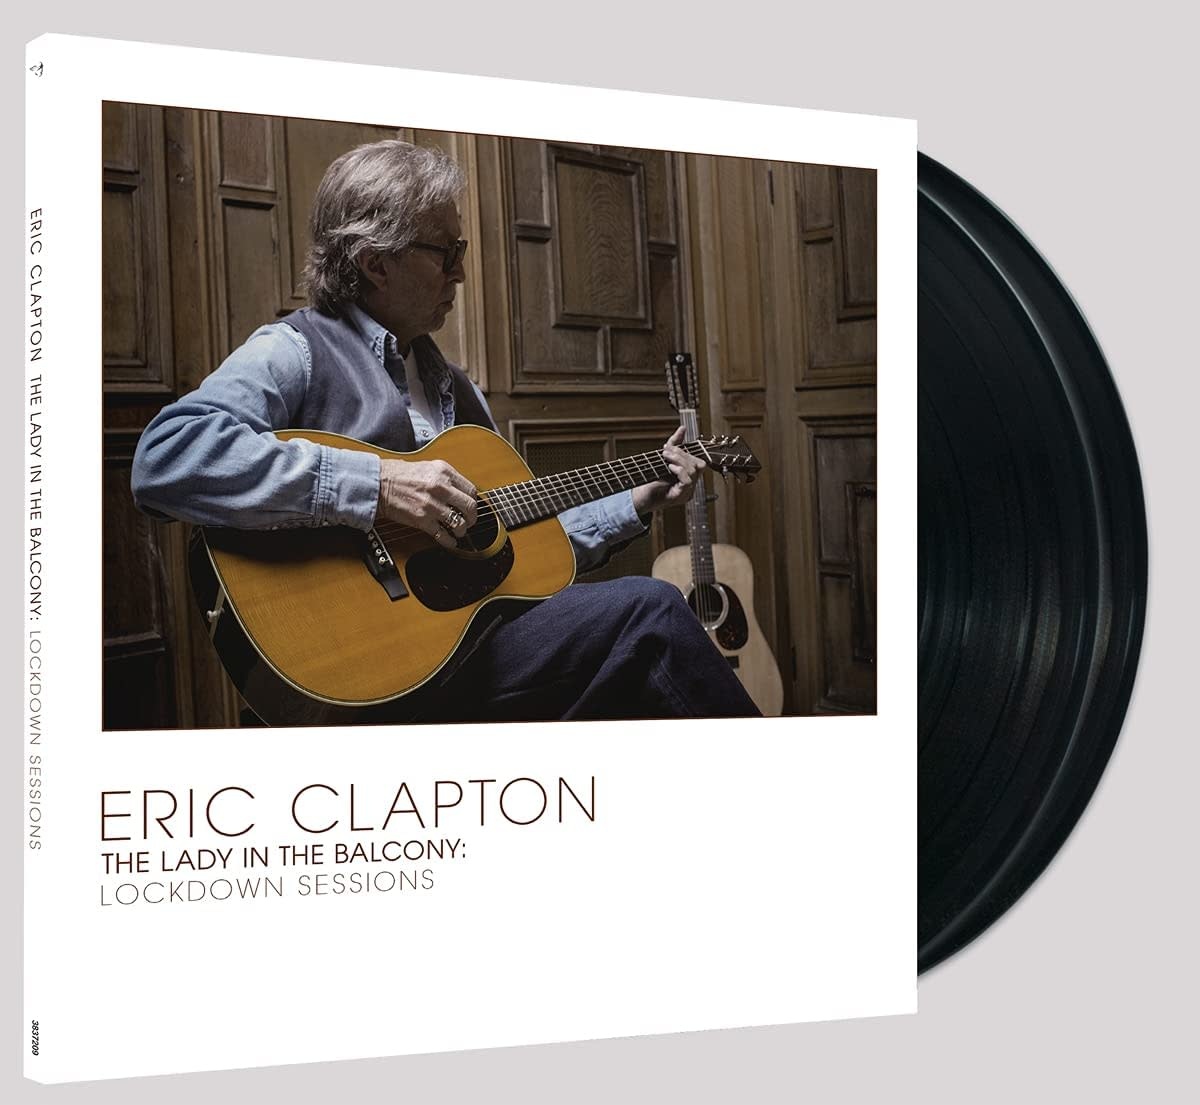 Eric Clapton – The Lady In The Balcony: Lockdown Sessions